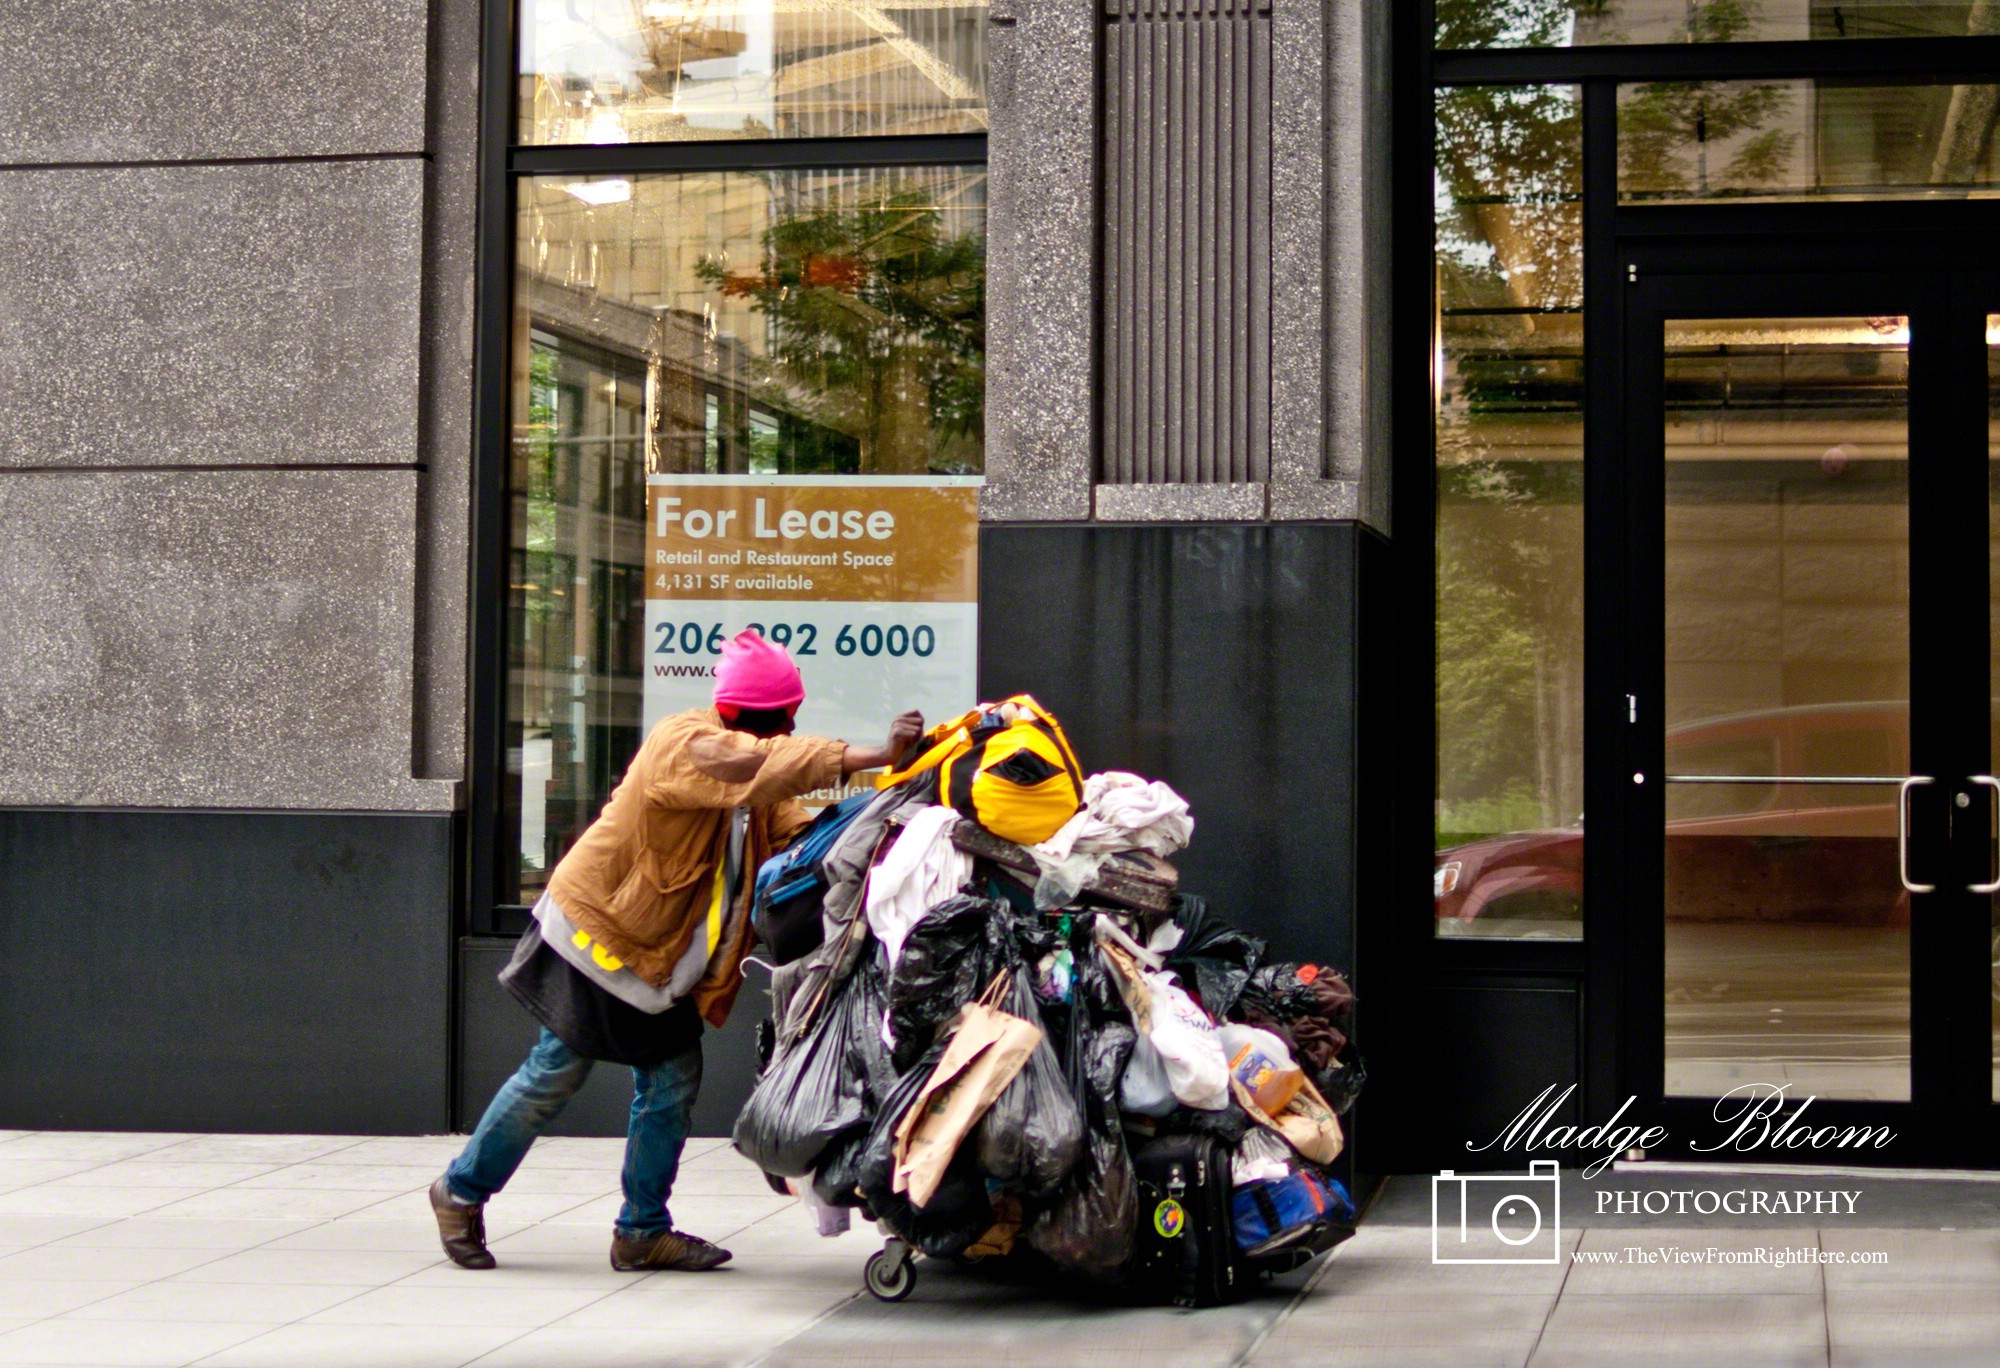 Homeless in Seattle – Weekly Top Shot #34